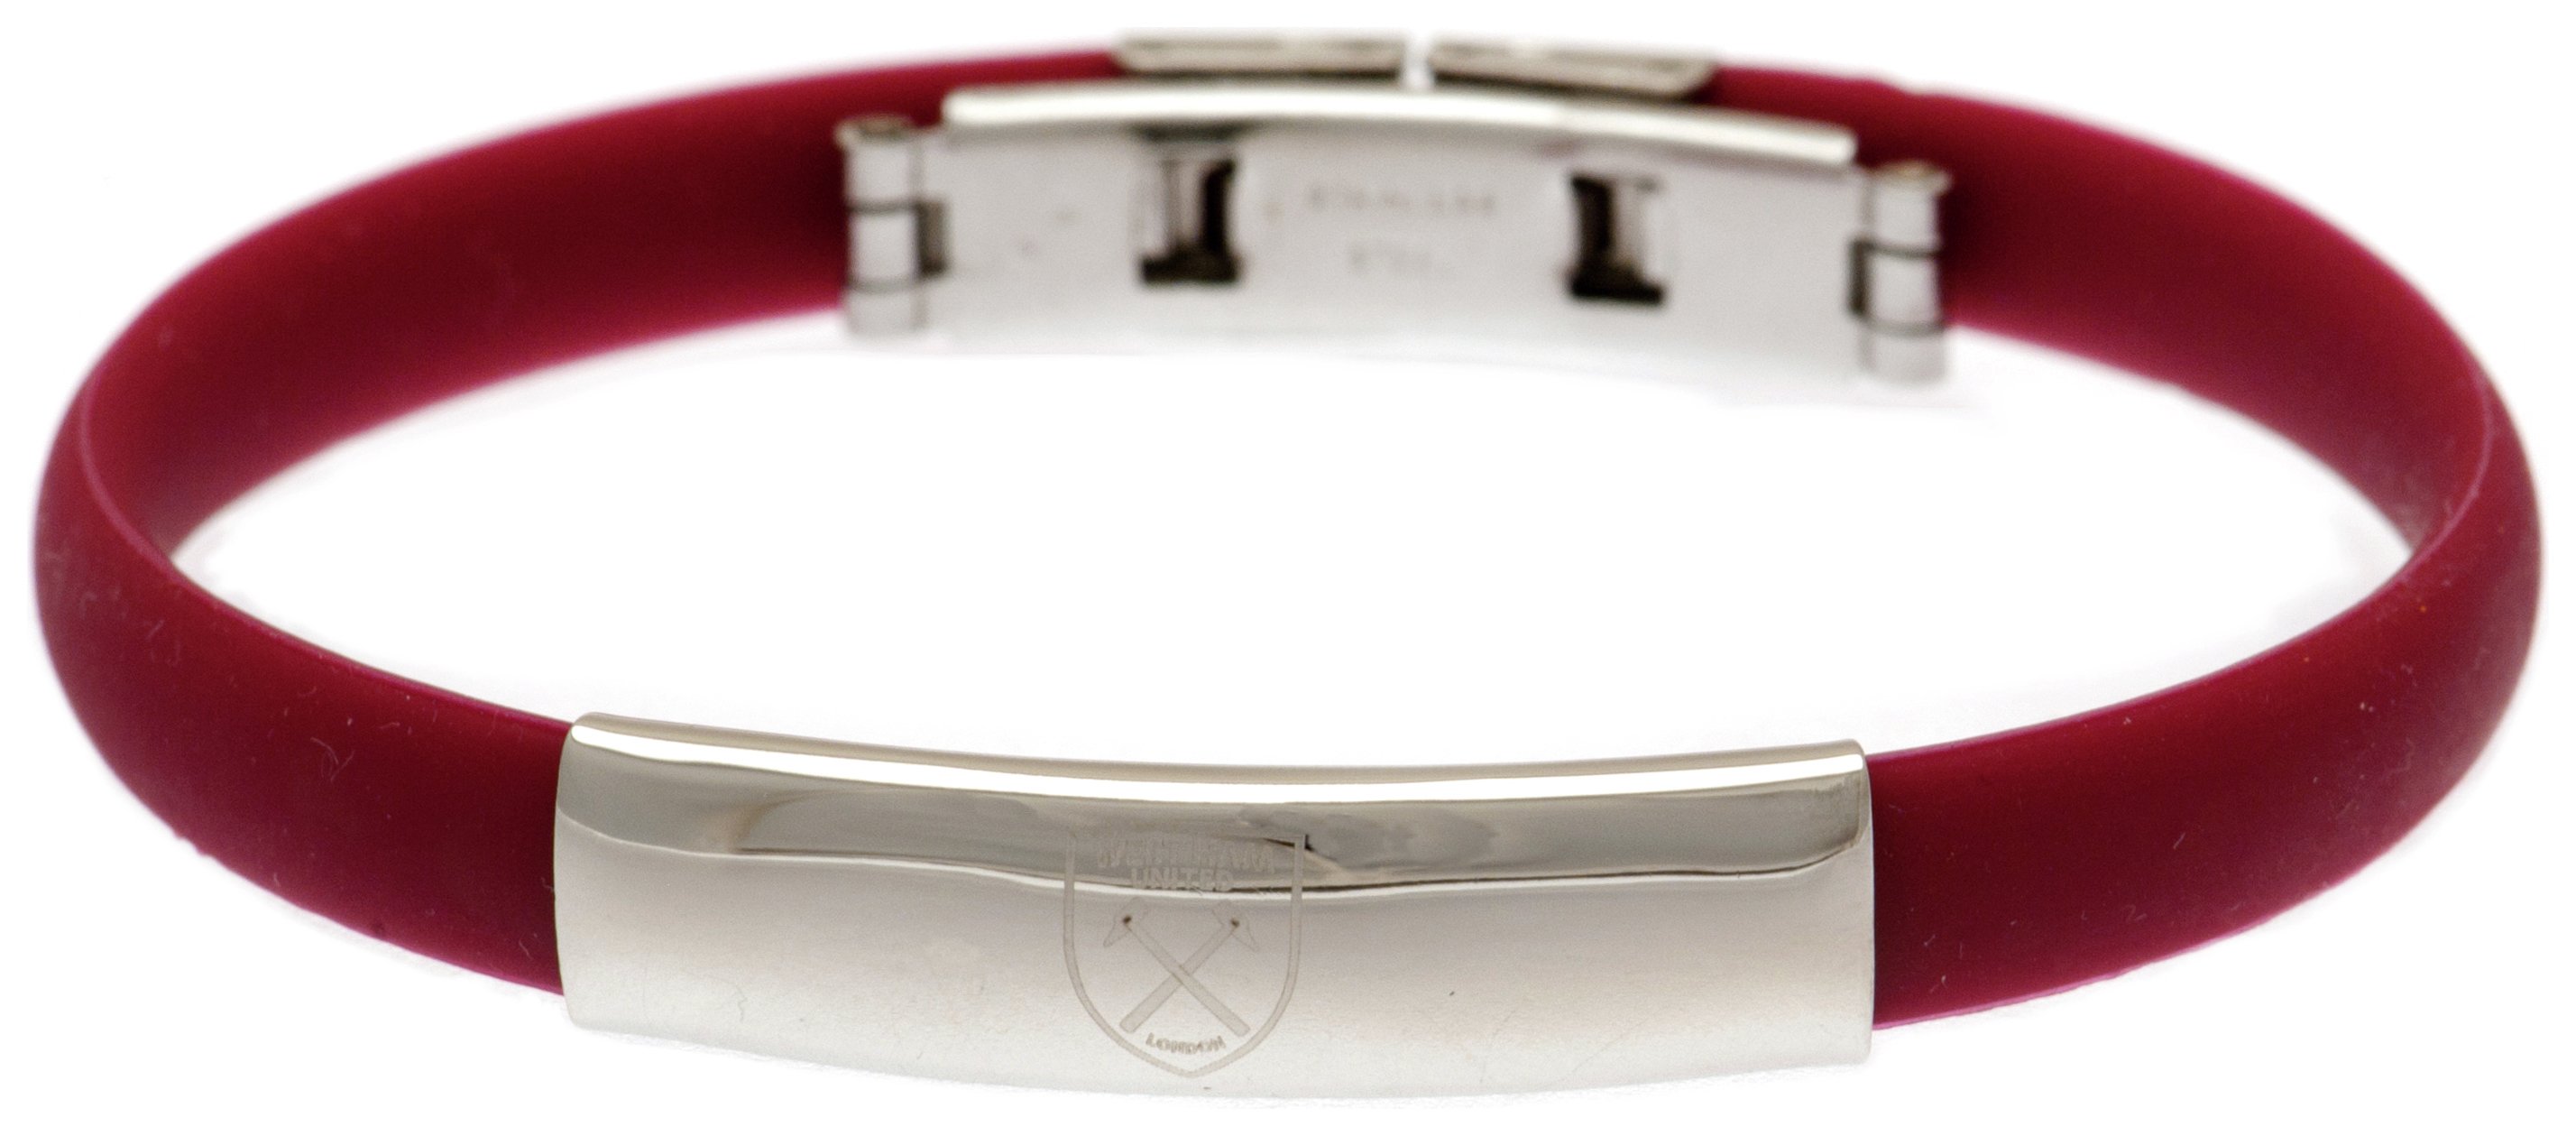 Stainless Steel and Rubber West Ham Bracelet